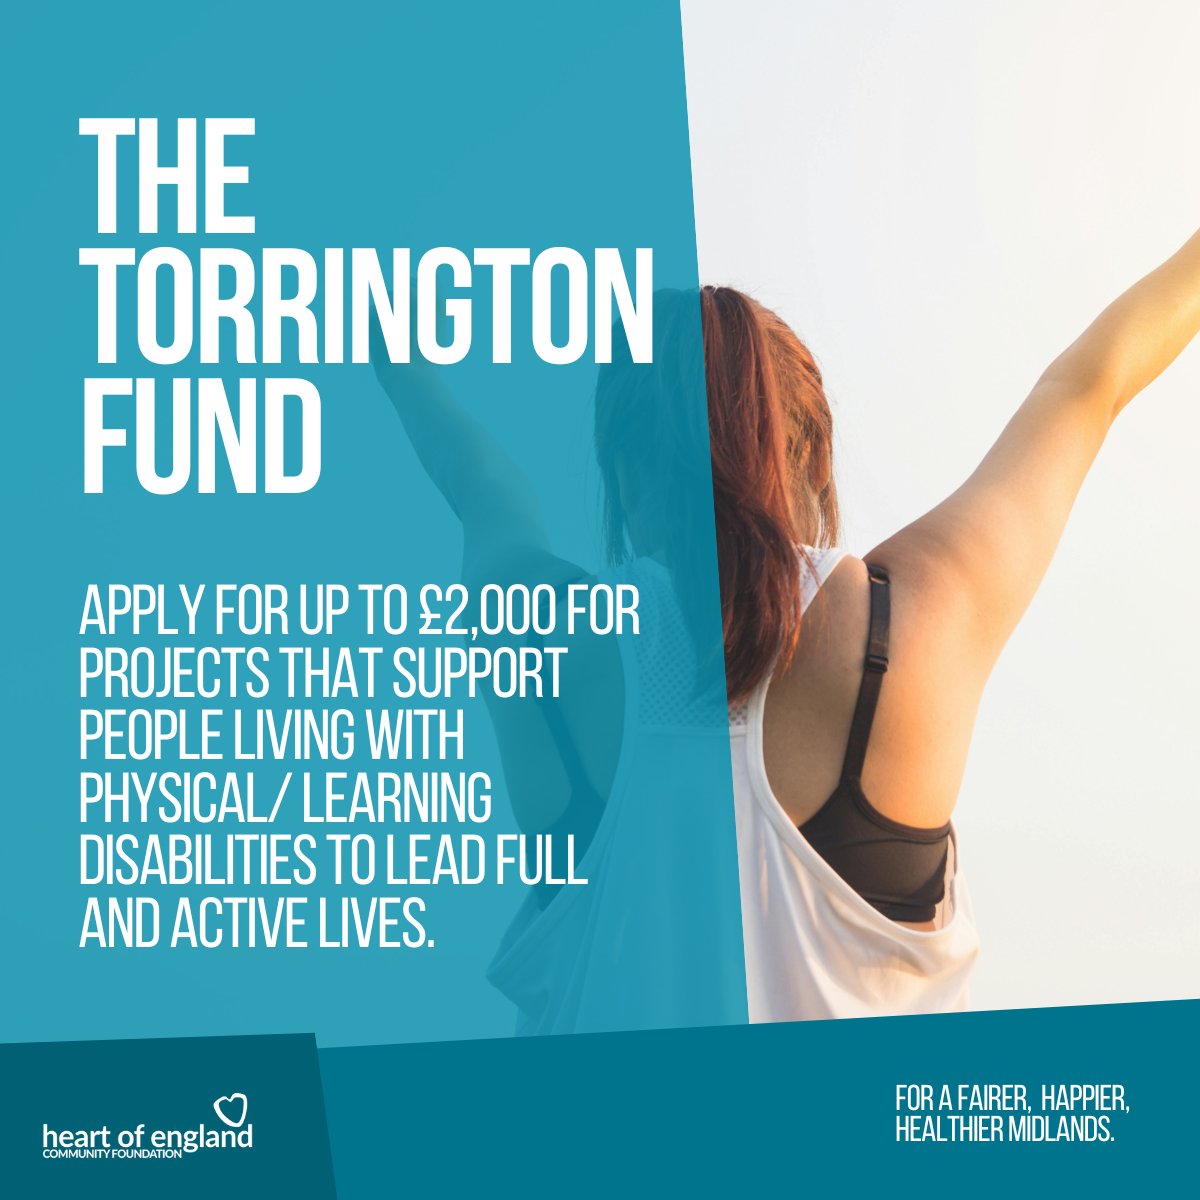 💙 Are you a Coventry or Warwickshire-based organisation supporting those with disabilities? Explore the Torrington Fund offering grants up to £2,000! Empower independence, social engagement, and active living. Check eligibility now: bit.ly/the-torrington…